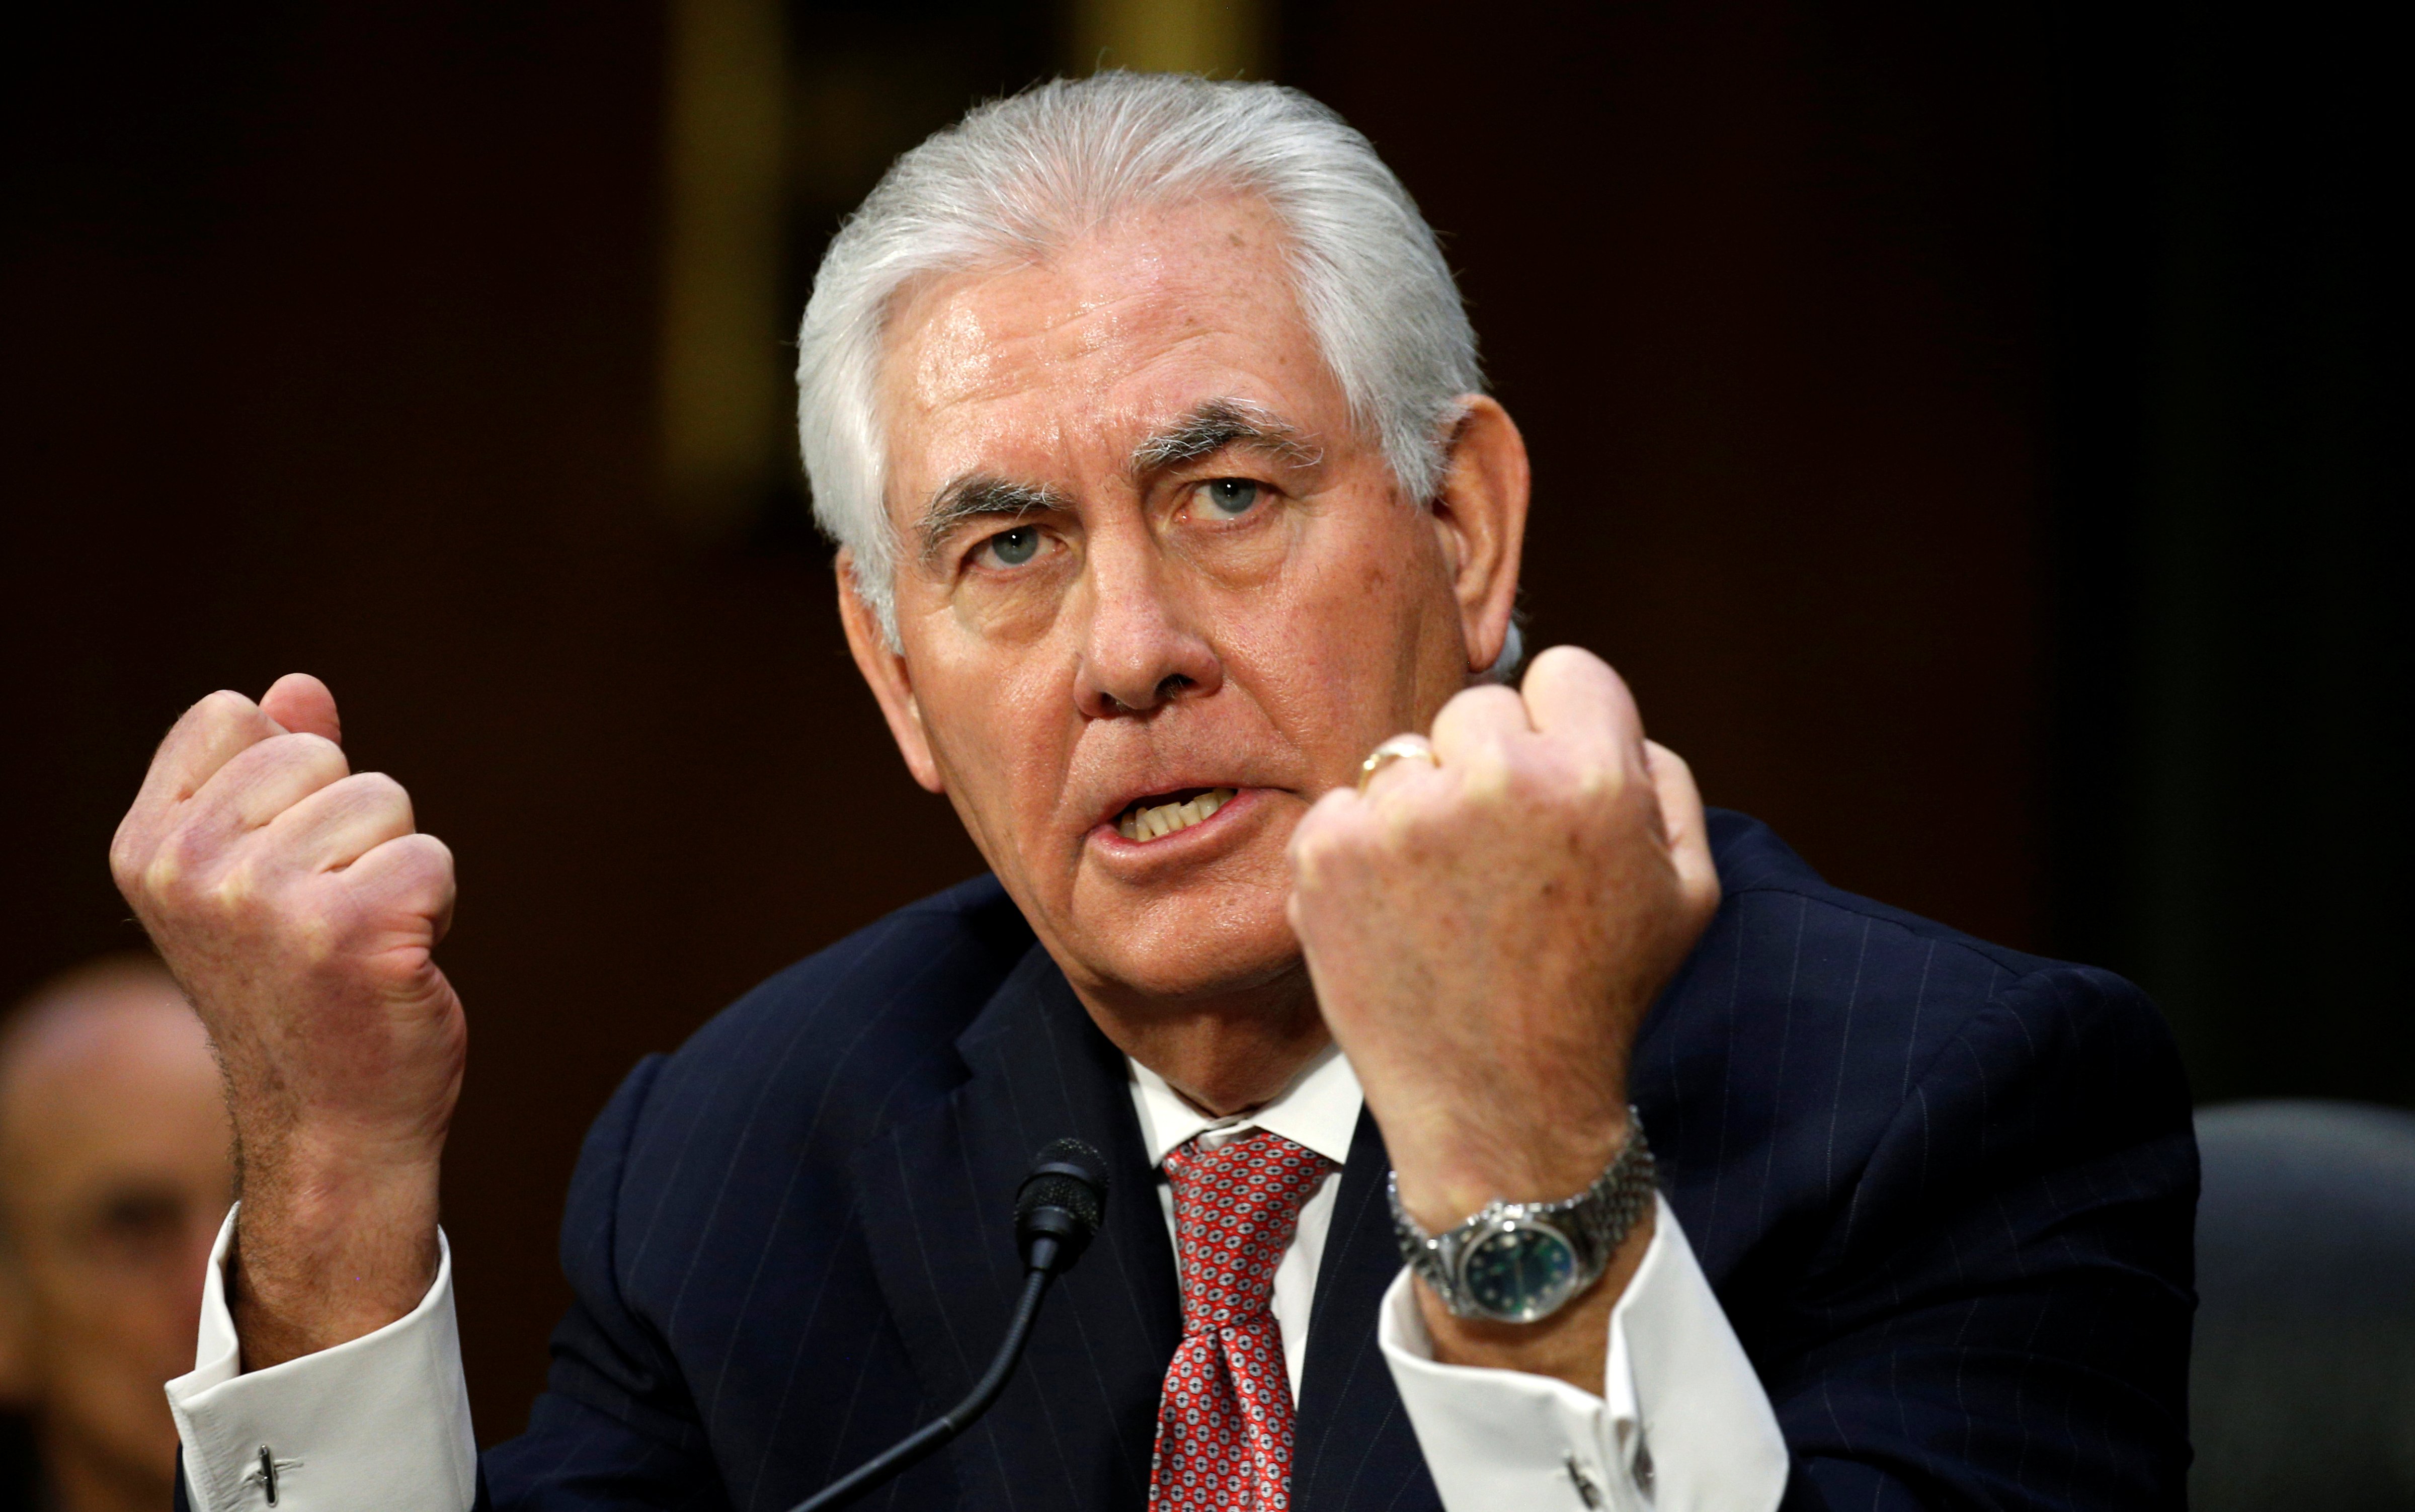 Rex Tillerson, the former chairman and chief executive officer of ExxonMobil, testifies during a Senate Foreign Relations Committee confirmation hearing to become U.S. Secretary of State on Capitol Hill in Washington, D.C., on Jan. 11, 2017 (Kevin Lamarque—Reuters)